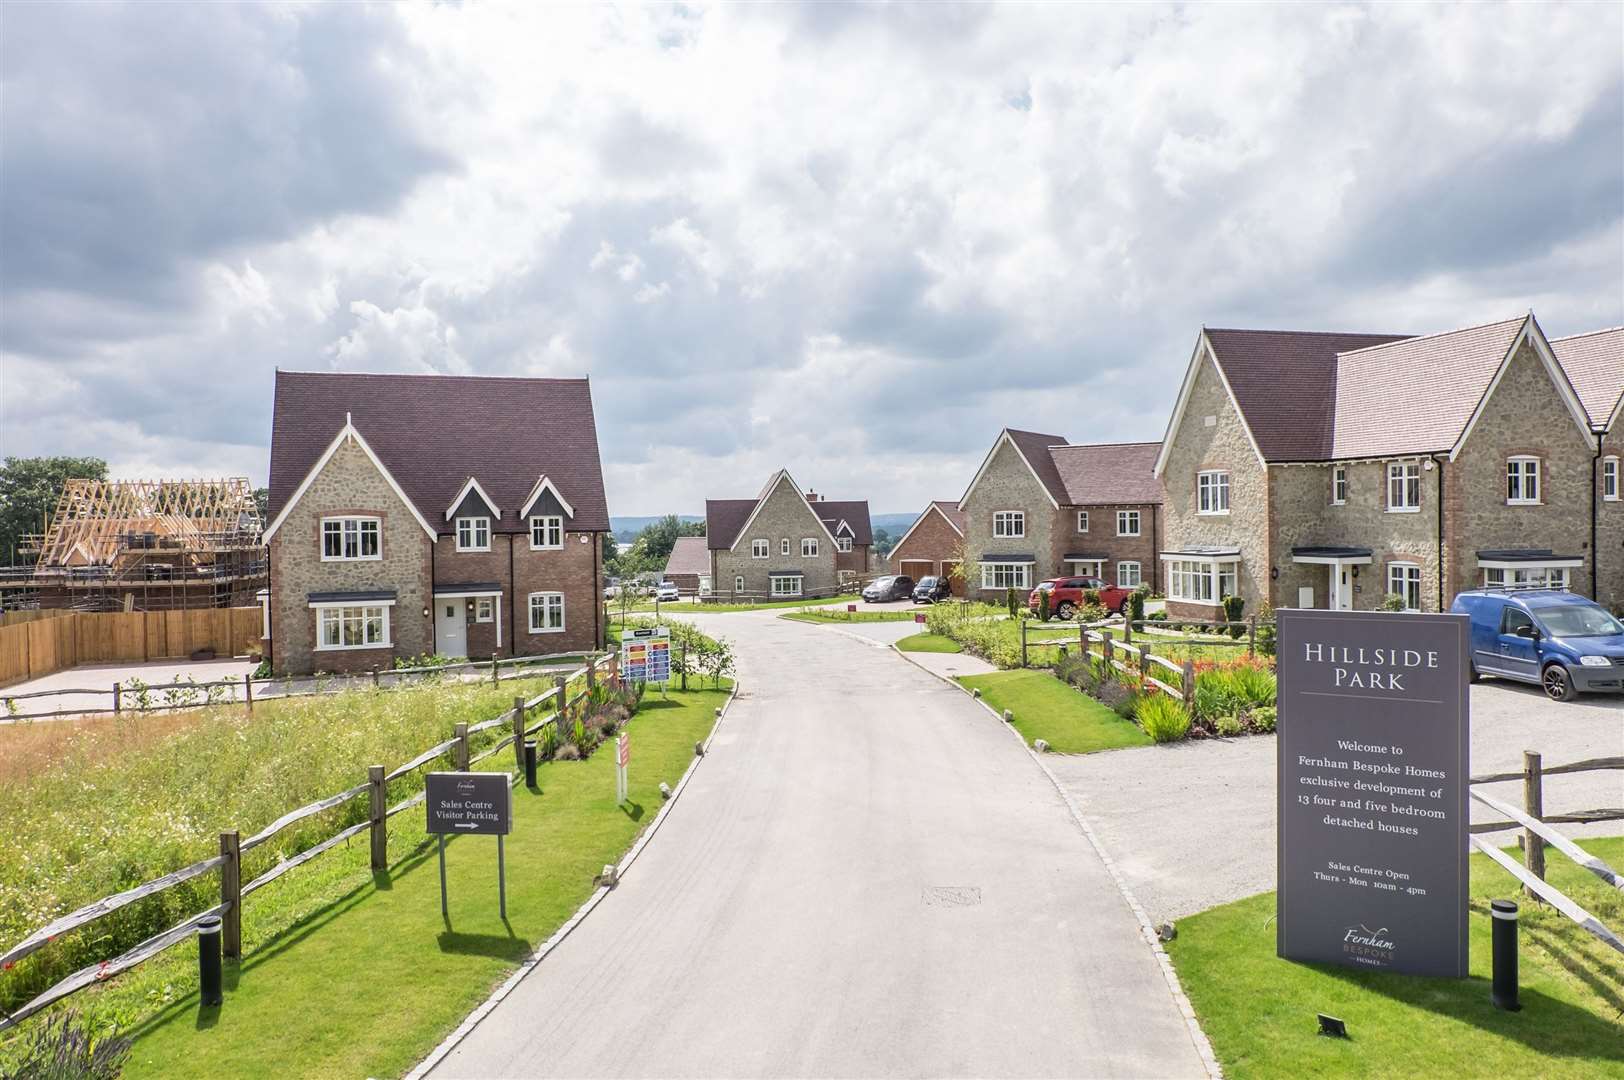 Fernham Homes is using Kentish ragstone in a development at Linton close to an historic ragstone quarry